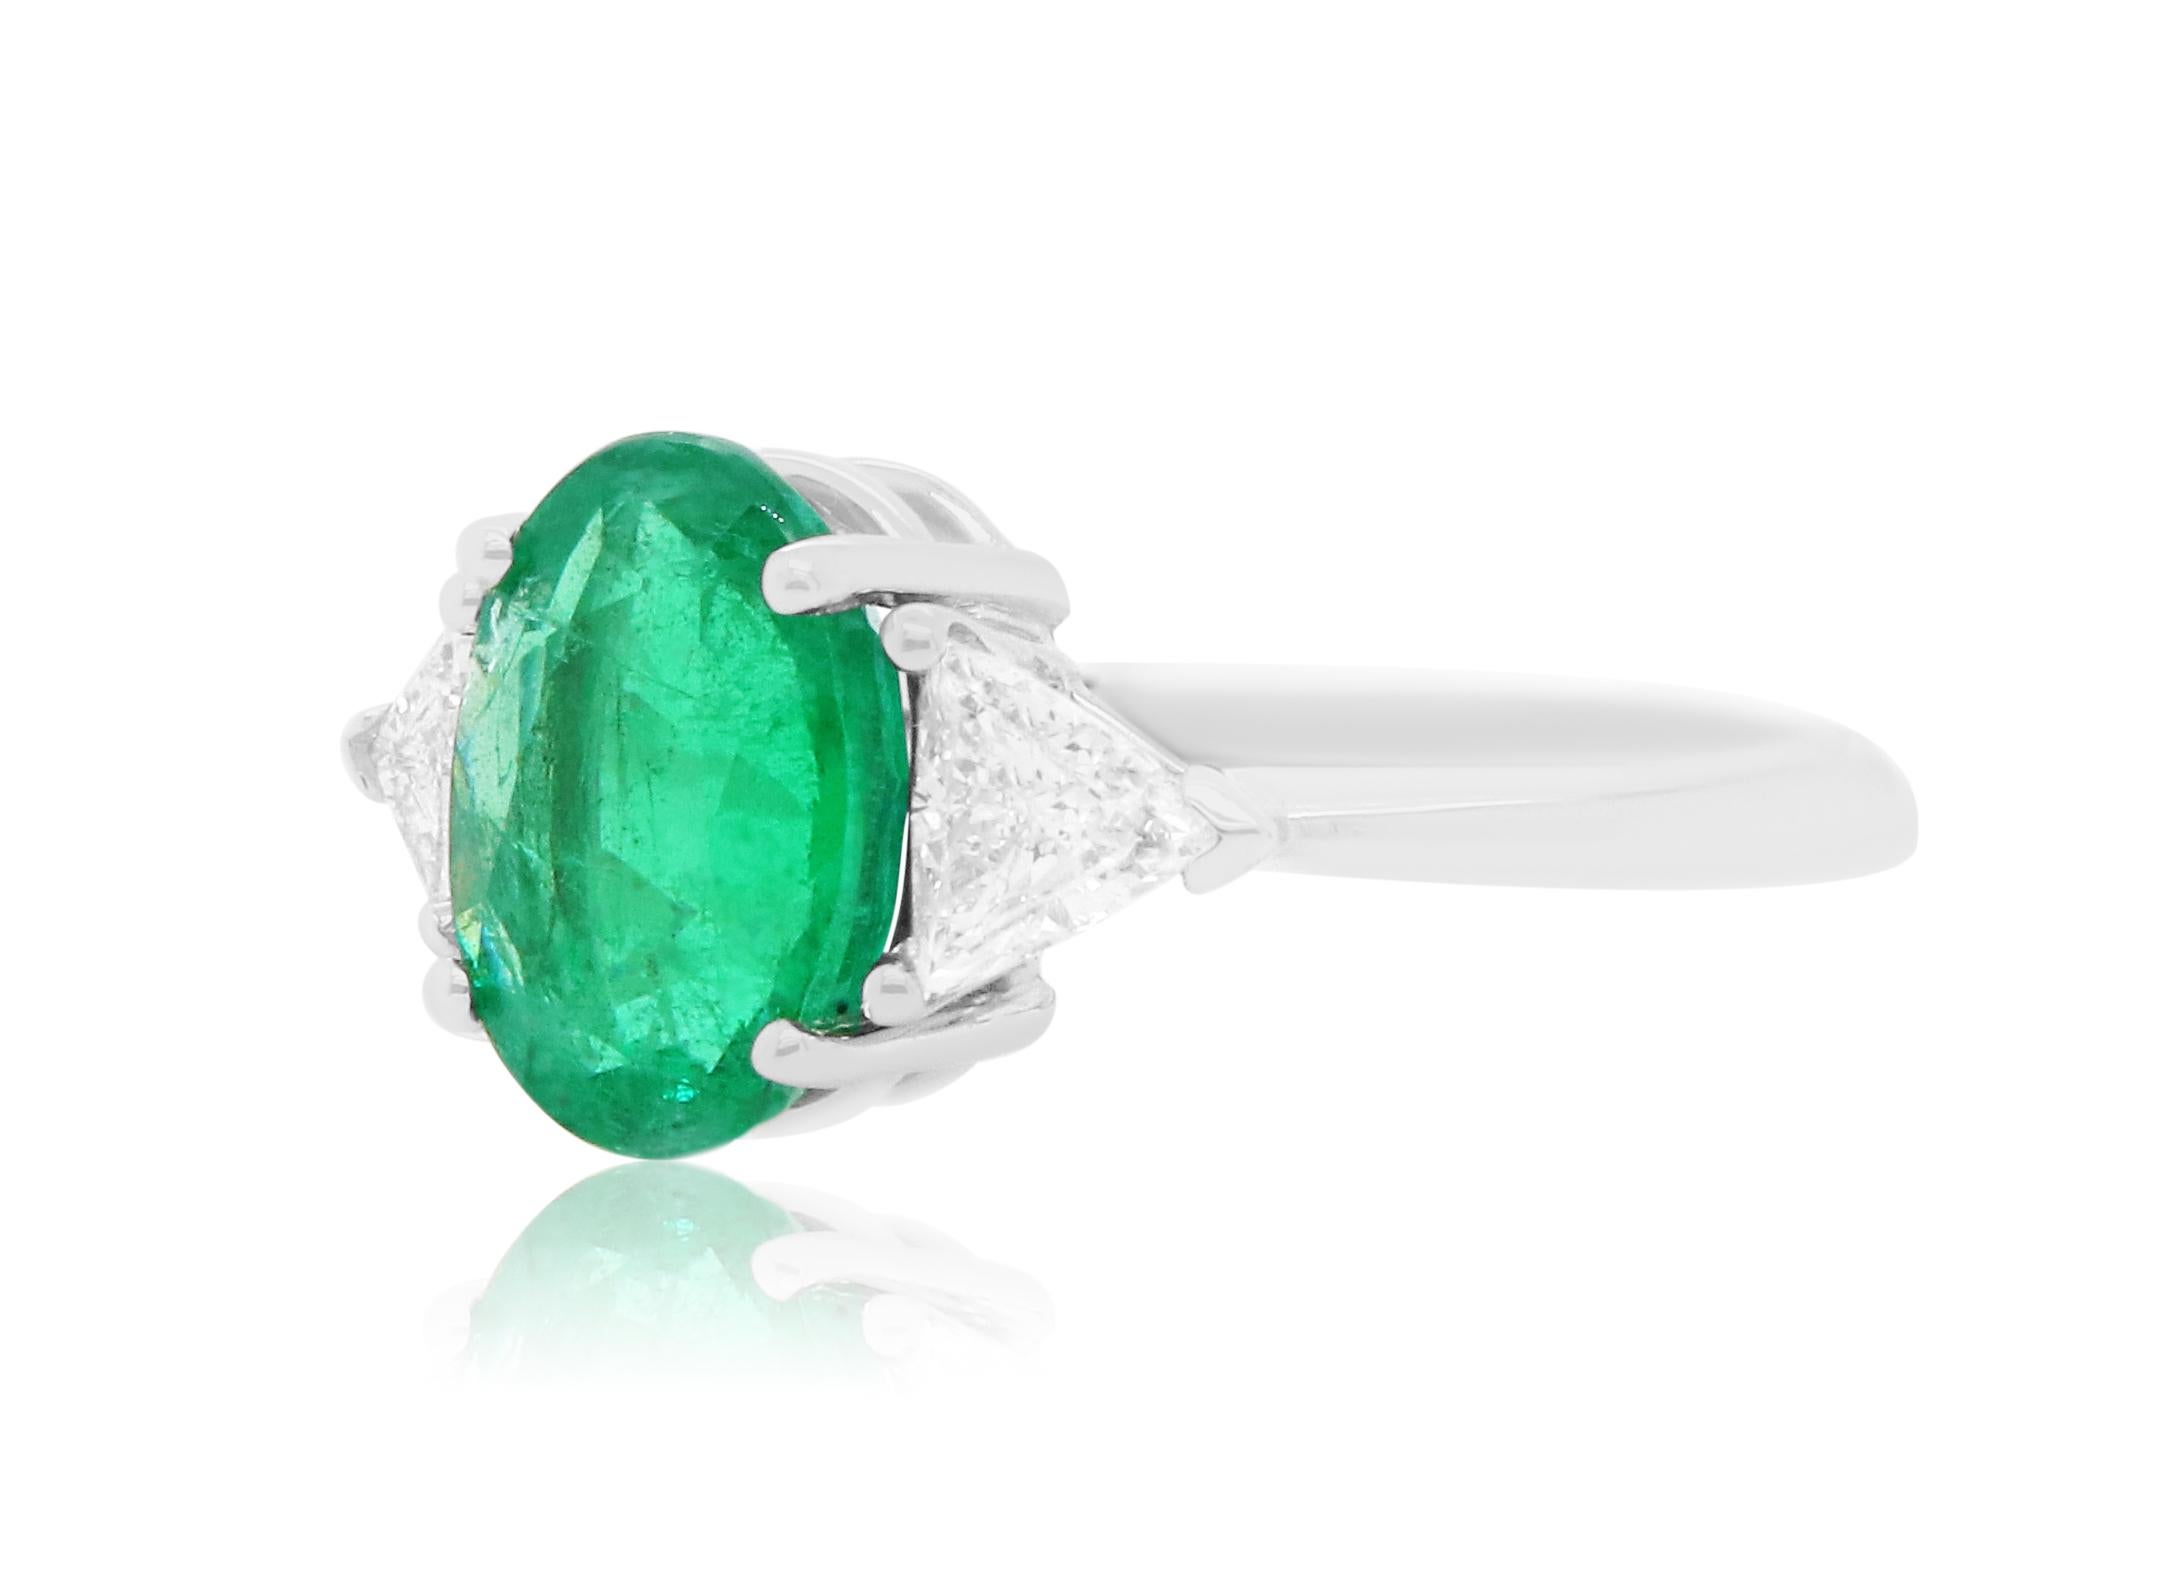 Material: 18k White Gold 
Center Stone Details: 1 Oval Emerald at 3.02 Carats - Measuring 8.2 x 10.9 mm
Diamond Details: 2 Brilliant Trillion Shaped White Diamonds at 0.58 Carats - Clarity: SI / Color: H-I
Alberto offers complimentary sizing on all